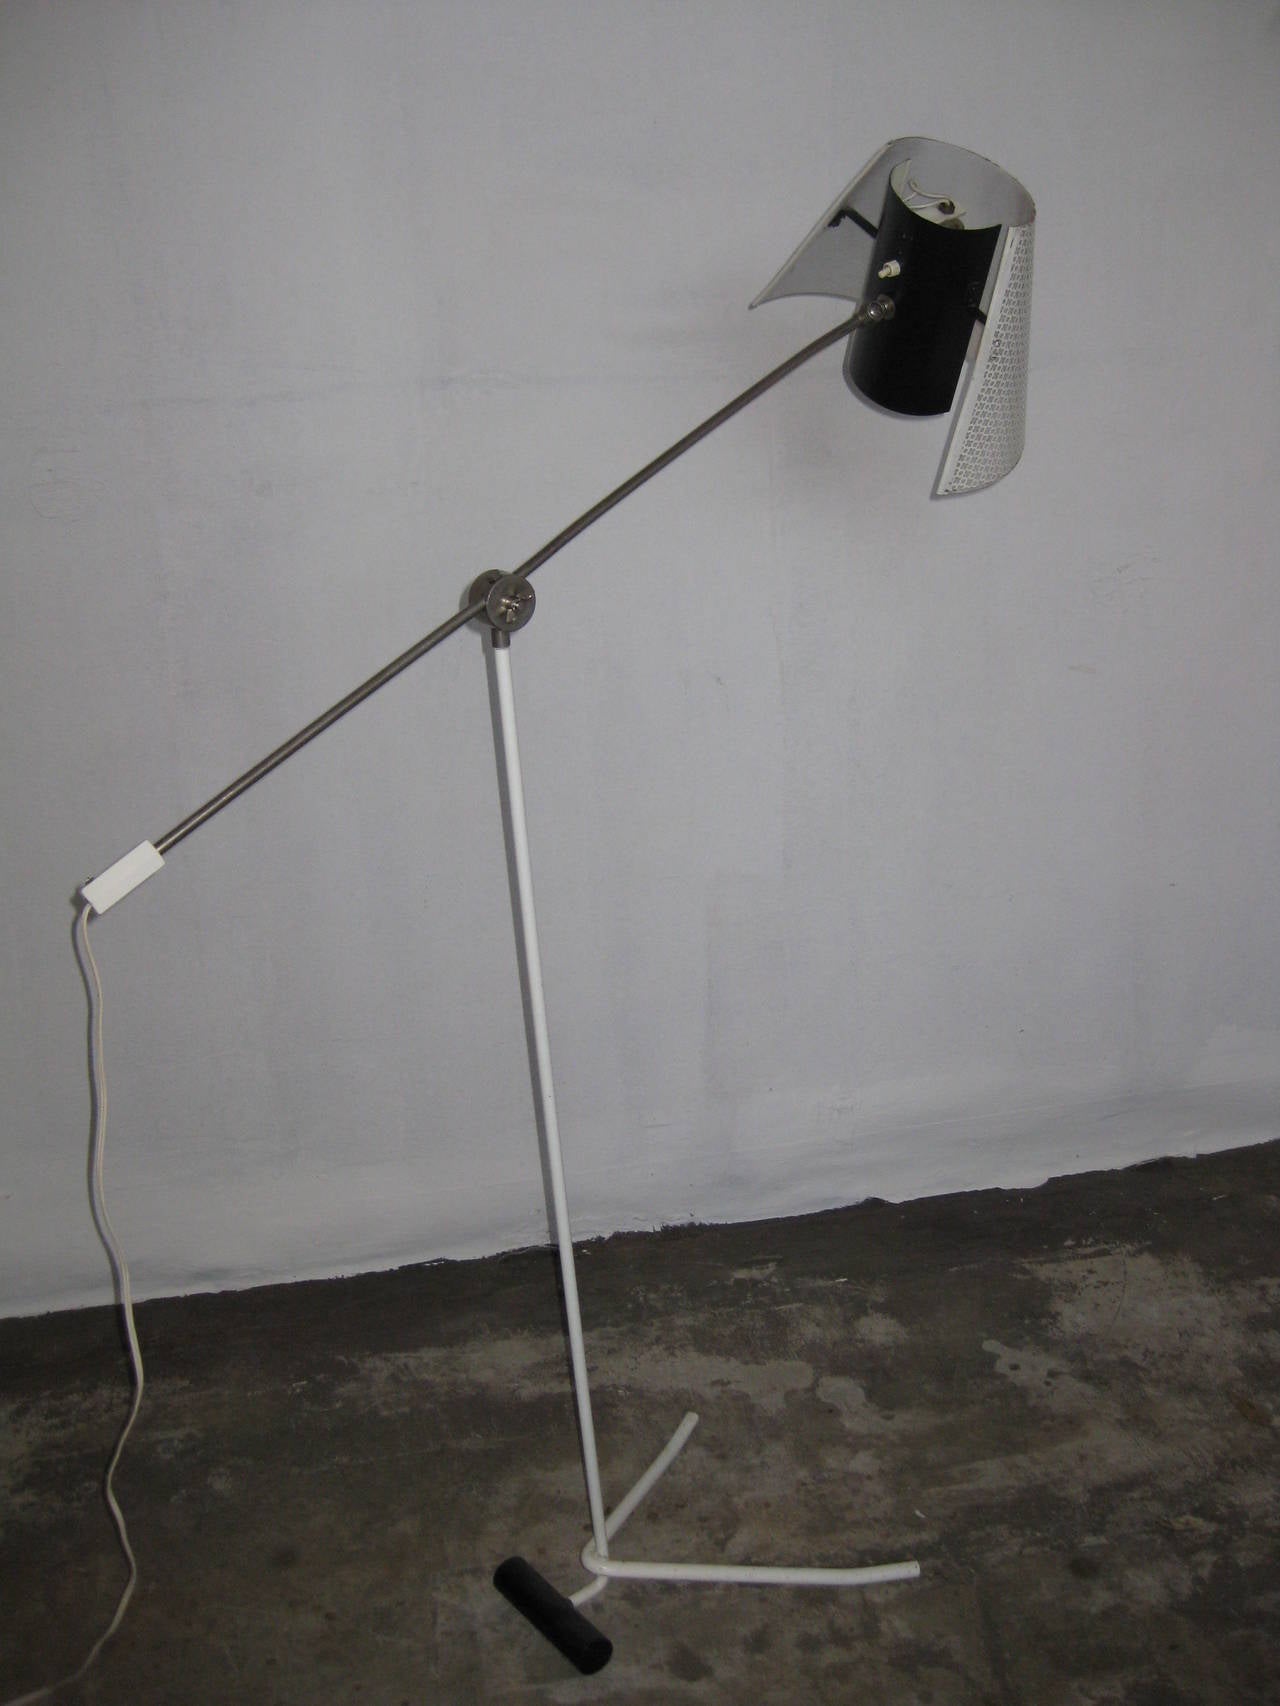 An Original 50-ies standing lamp with a base of 1m5cm high.
The arm is adjustable and stretches 98cm.In the photographed position it measures 1m37 cm high but of course you can lower or higher it .
The lamp is metal with a white and black